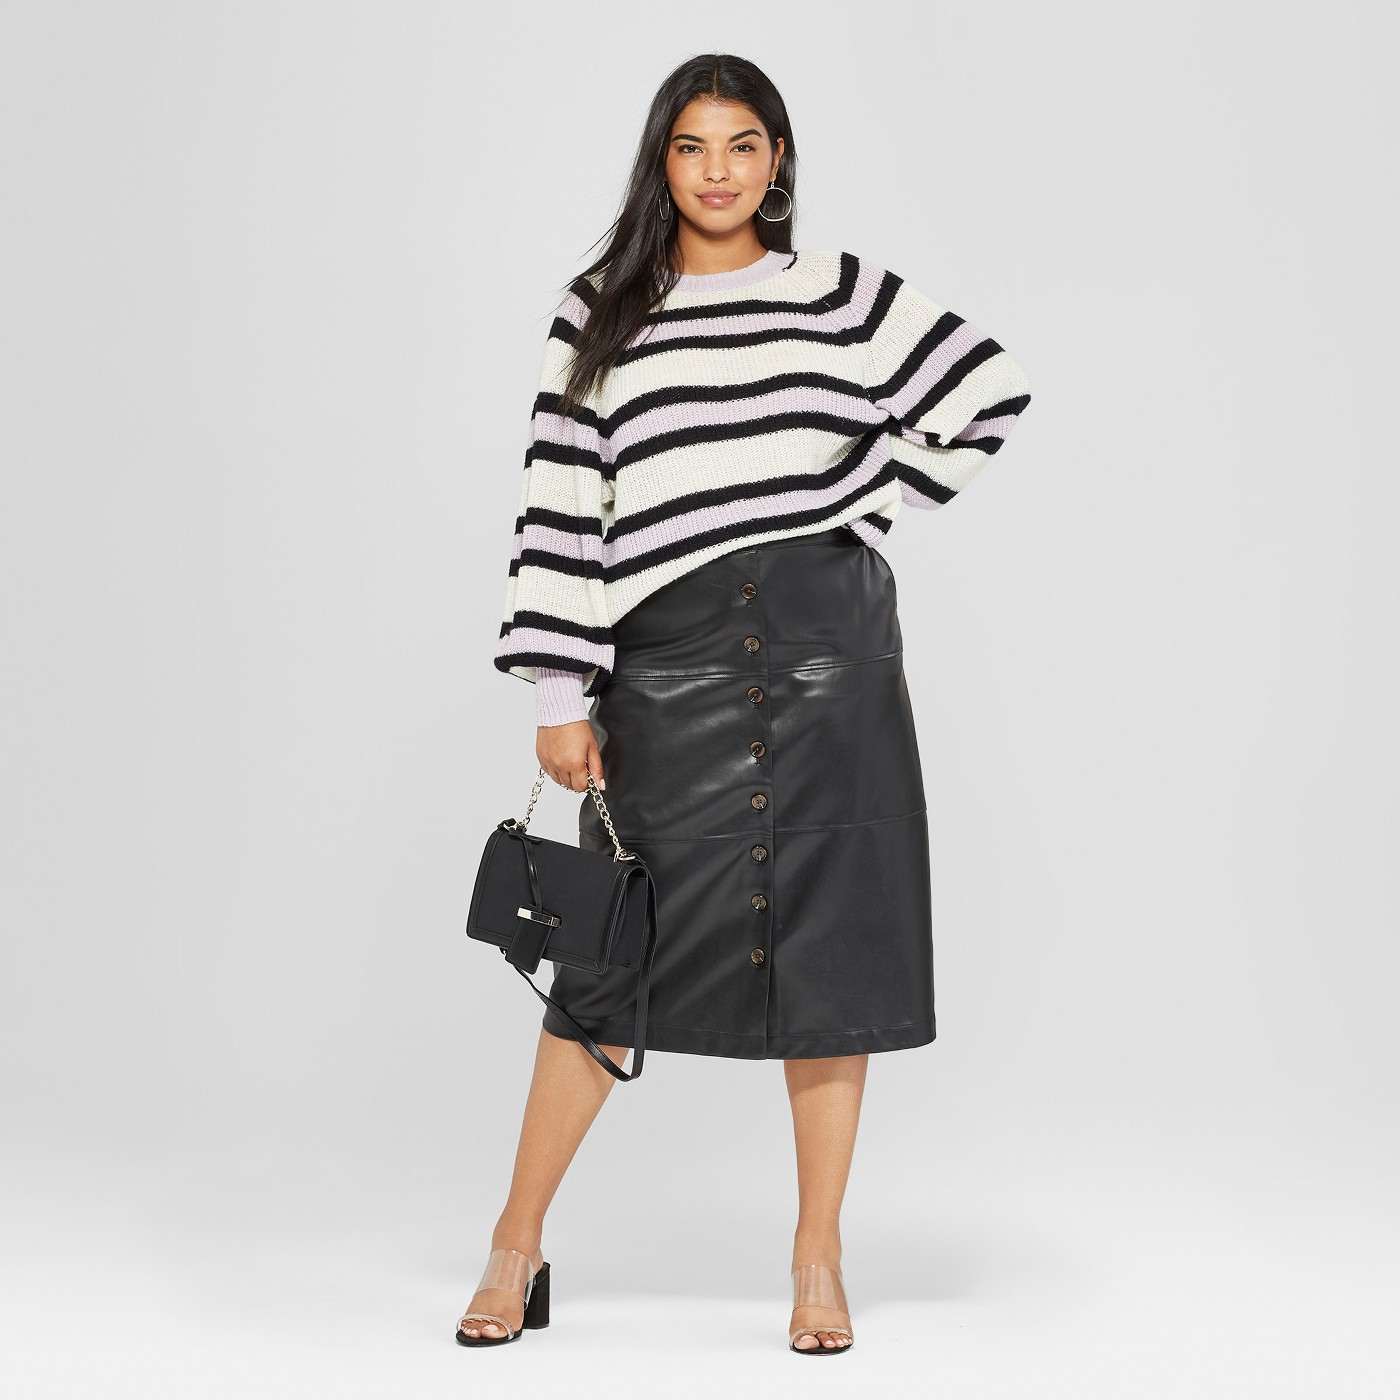 target’s packing the best winter fashion trends all under $50